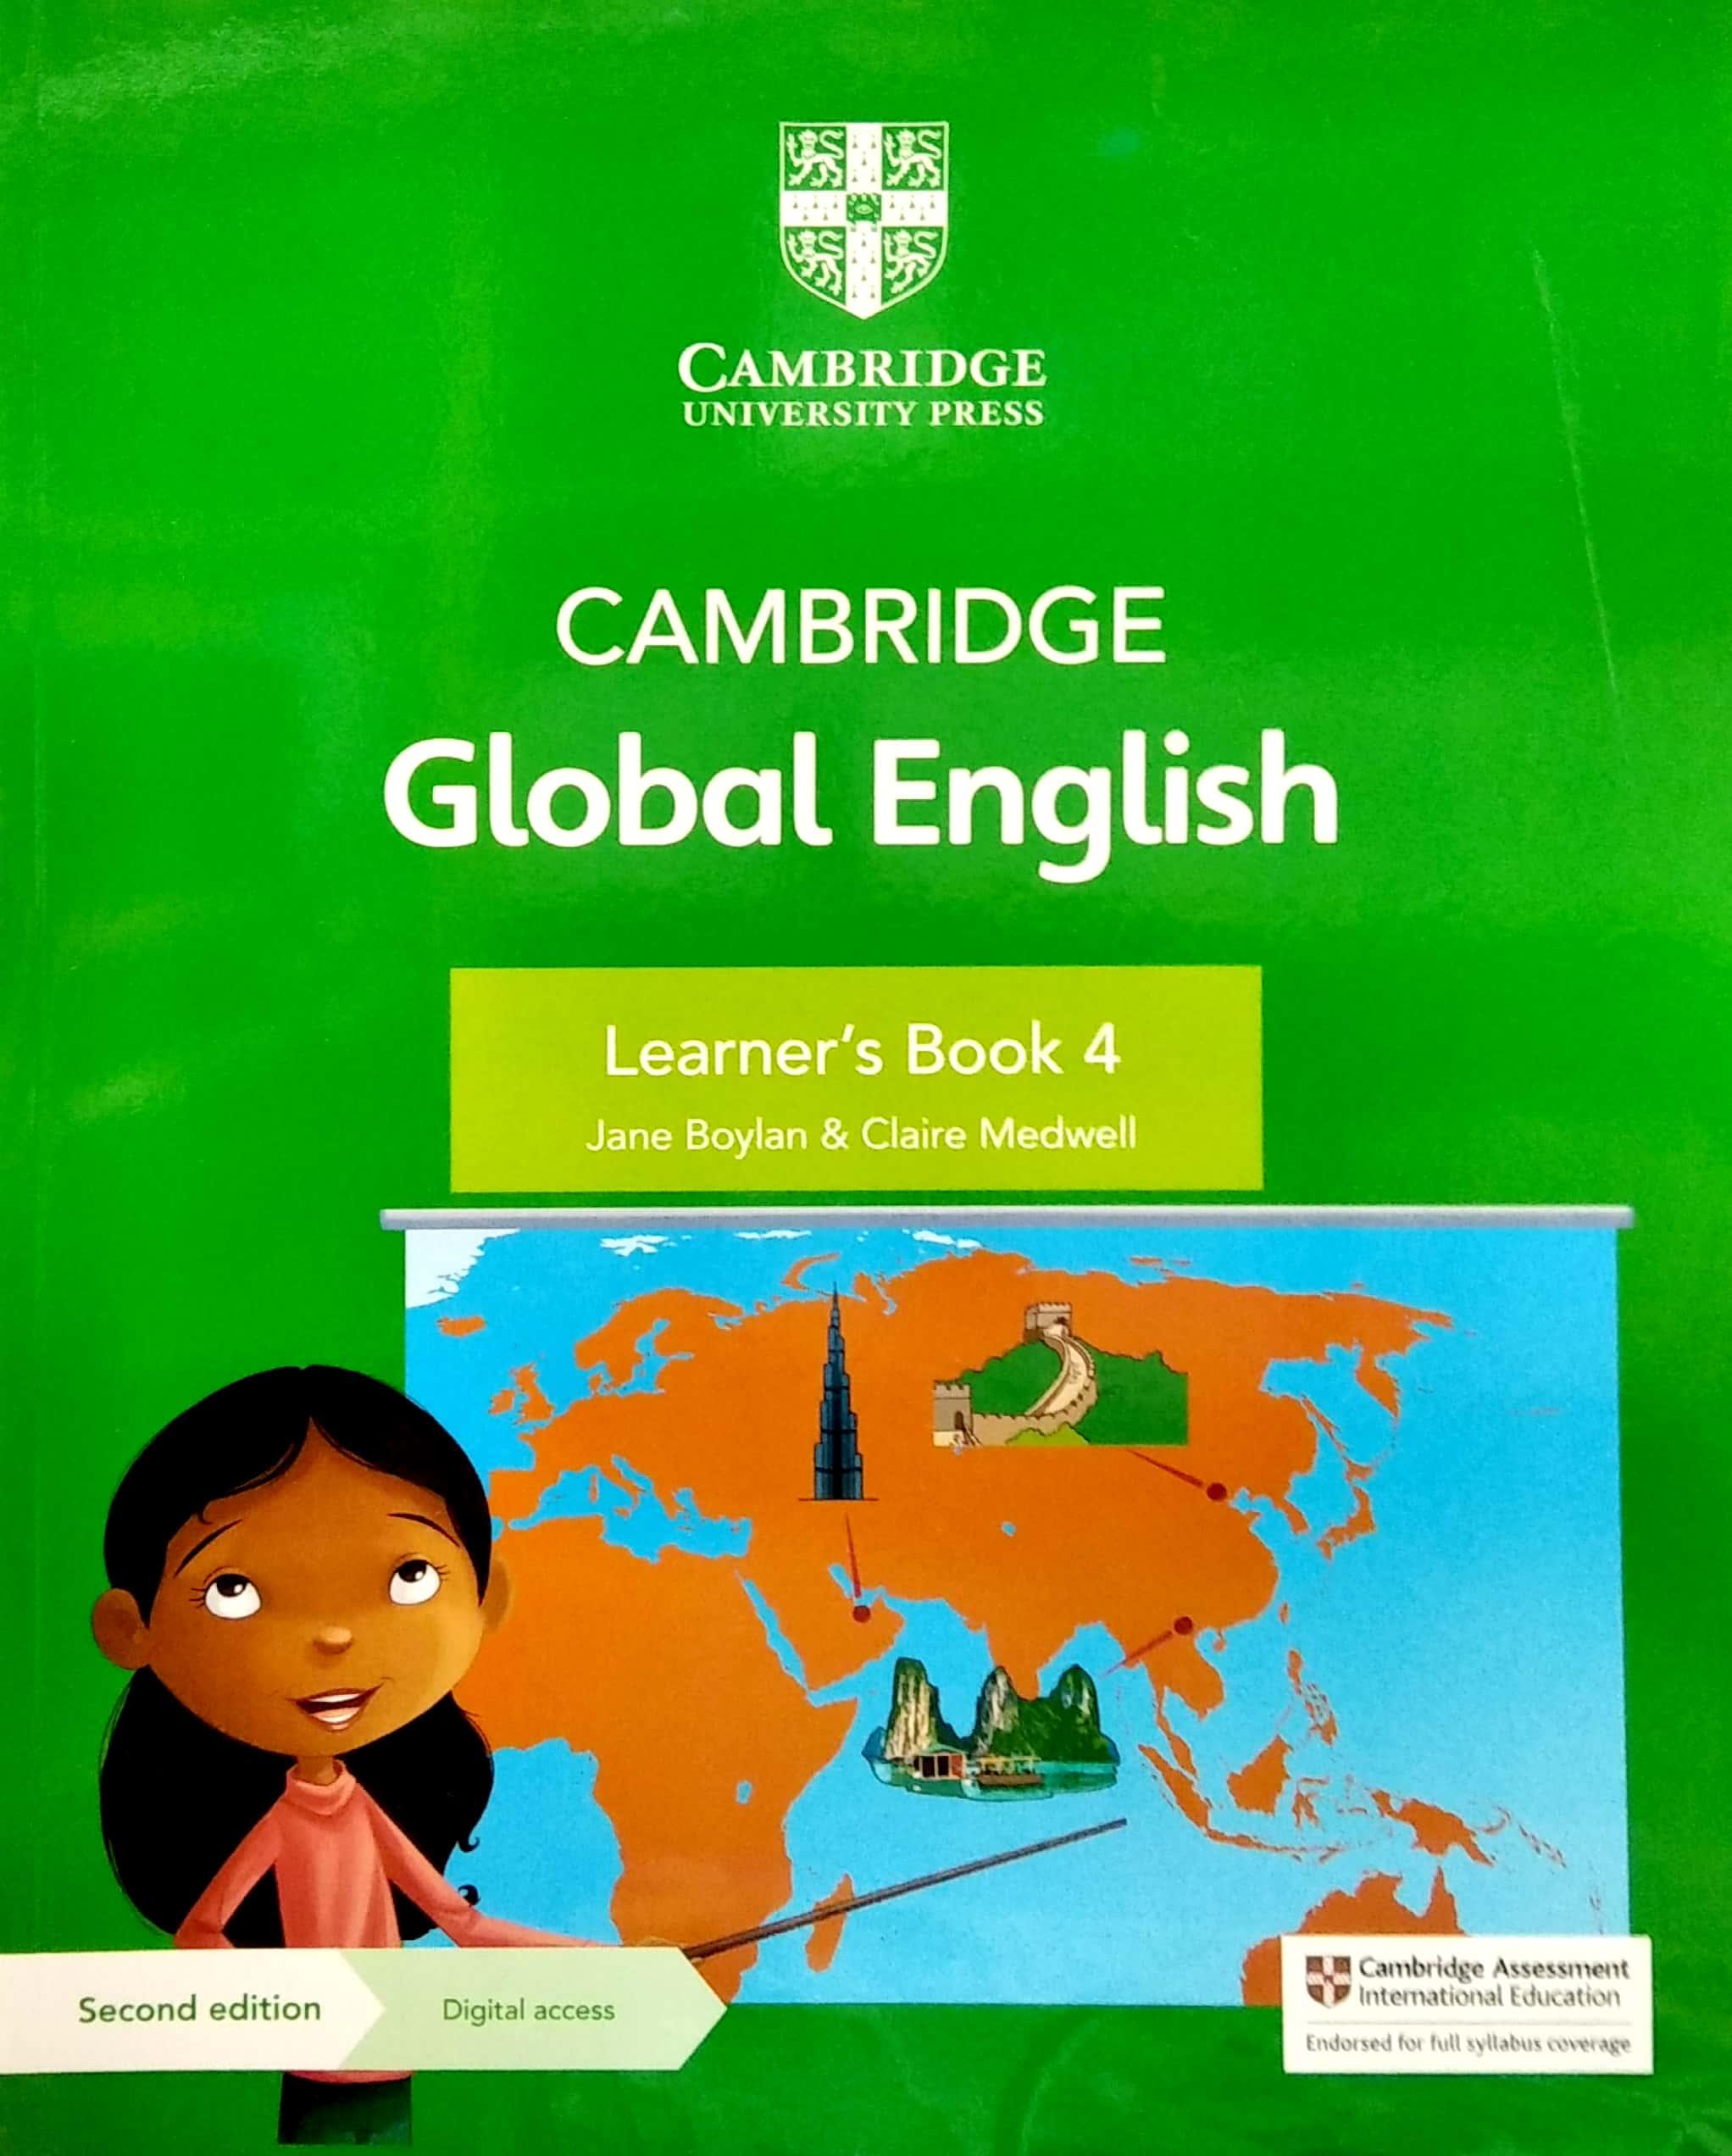 Cambridge Global English Learner's Book 4 With Digital Access (1 Year) 2nd Edition